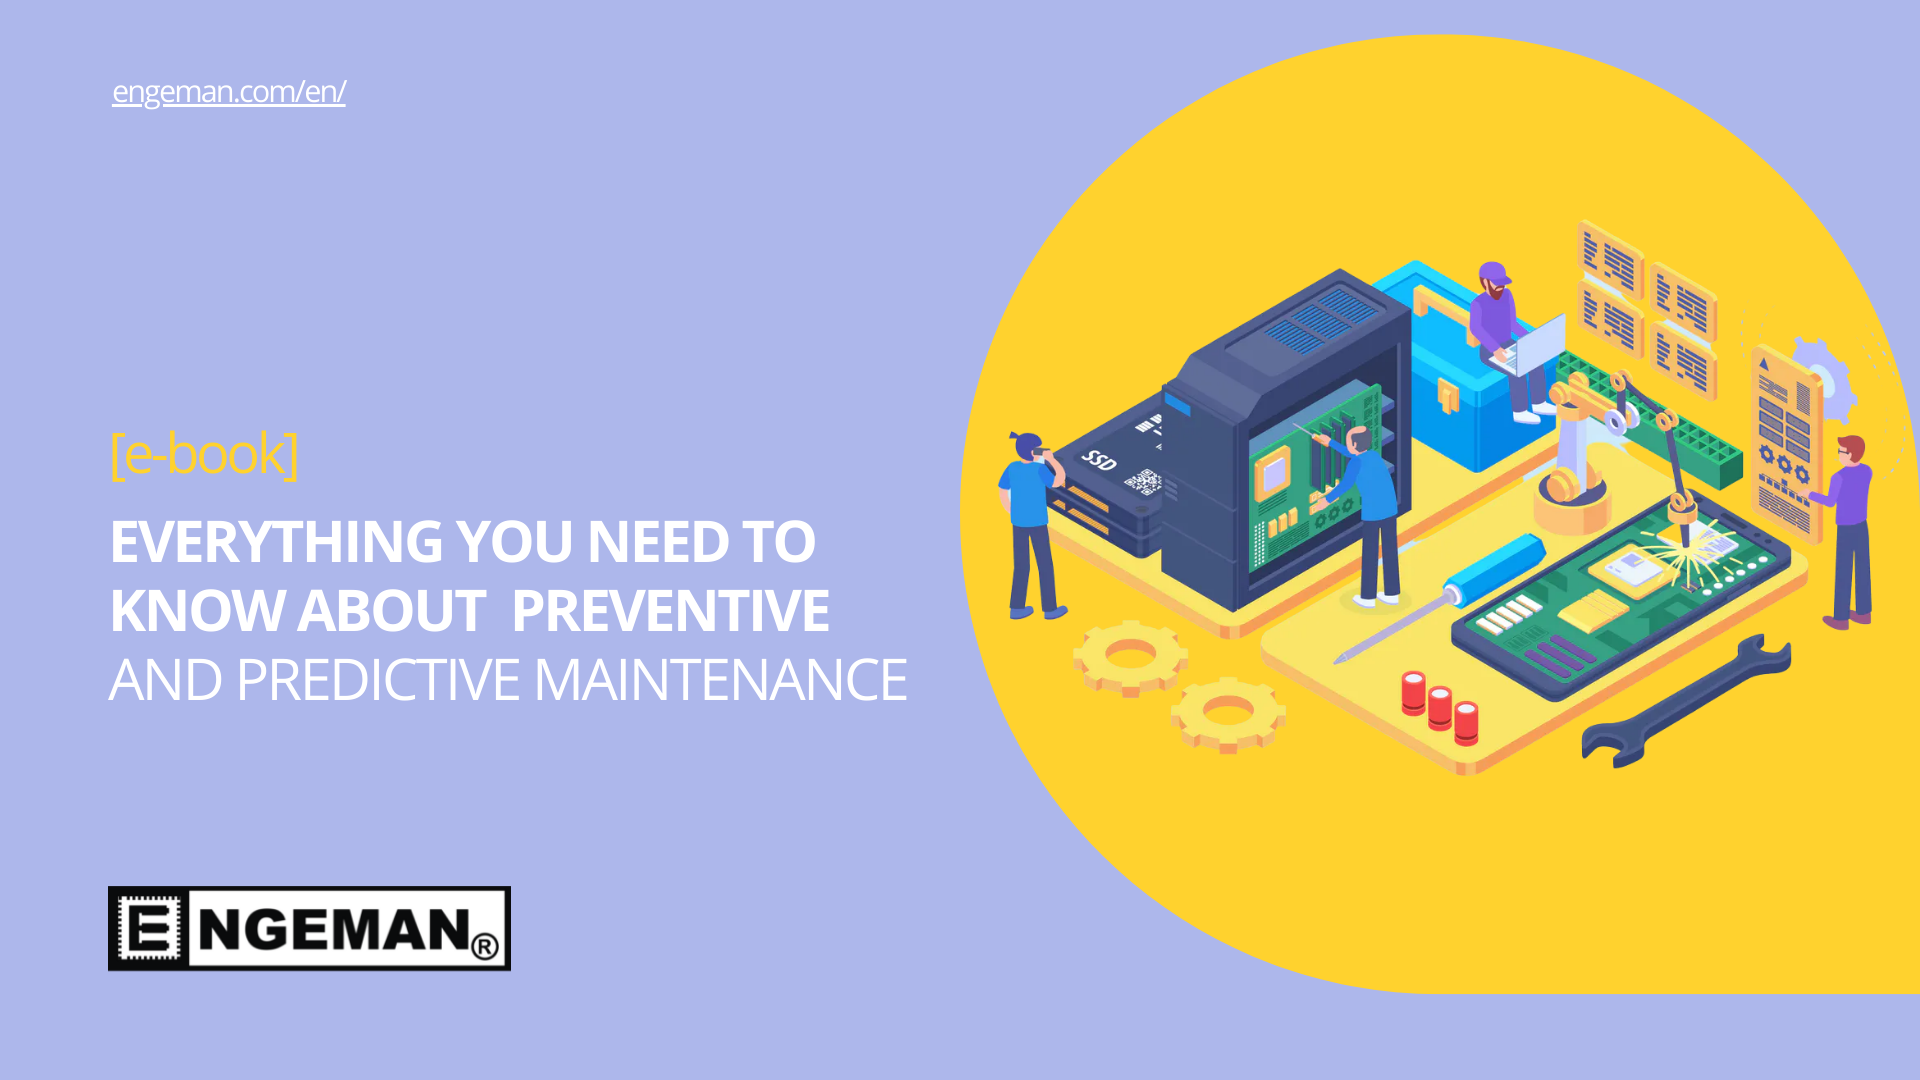 e-book - EVERYTHING YOU NEED TO KNOW ABOUT PREVENTIVE AND PREDICTIVE MAINTENANCE